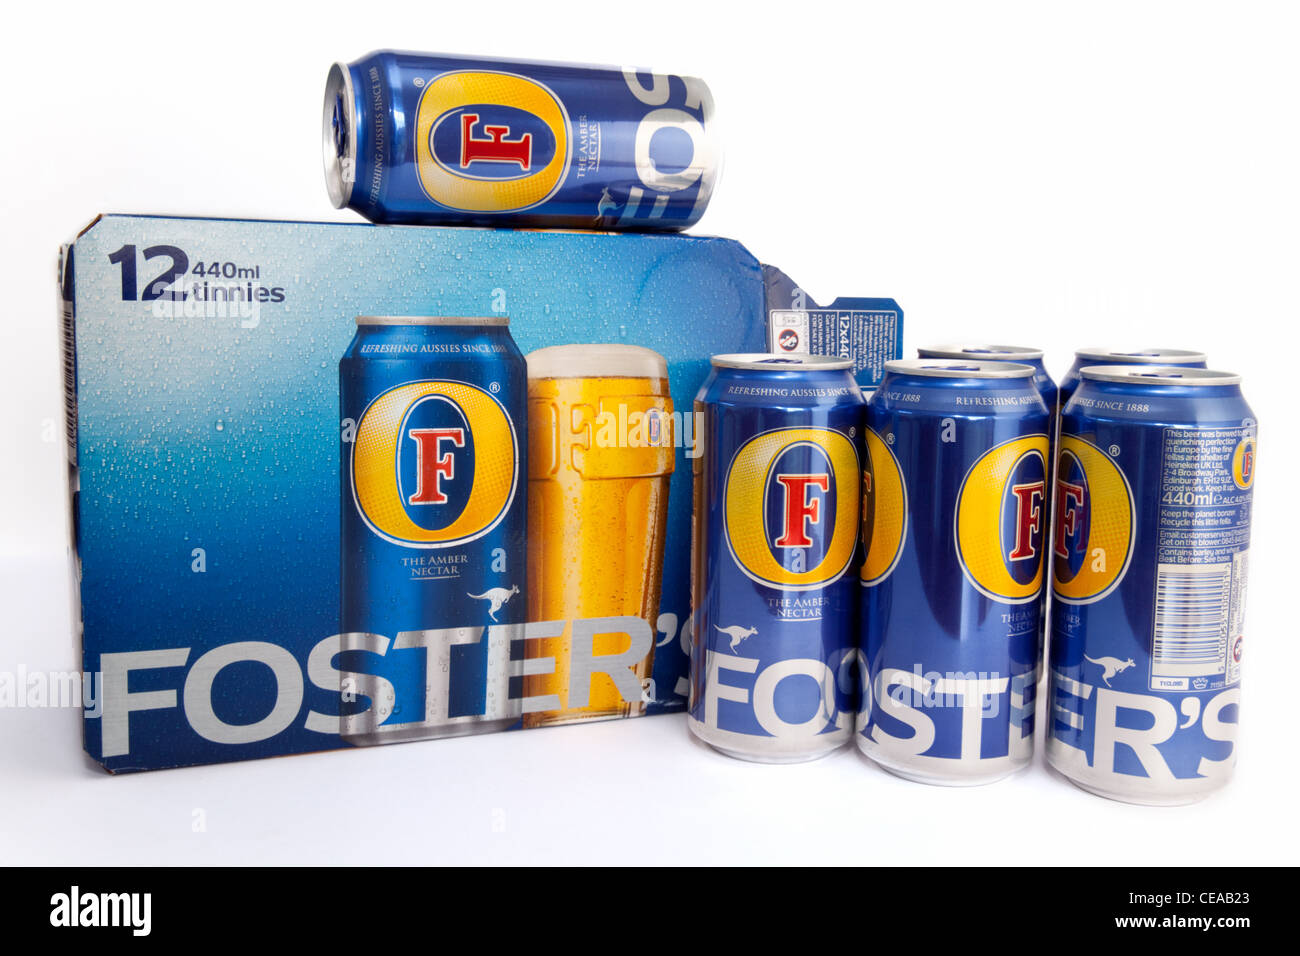 Fosters lager - box and cans Stock Photo